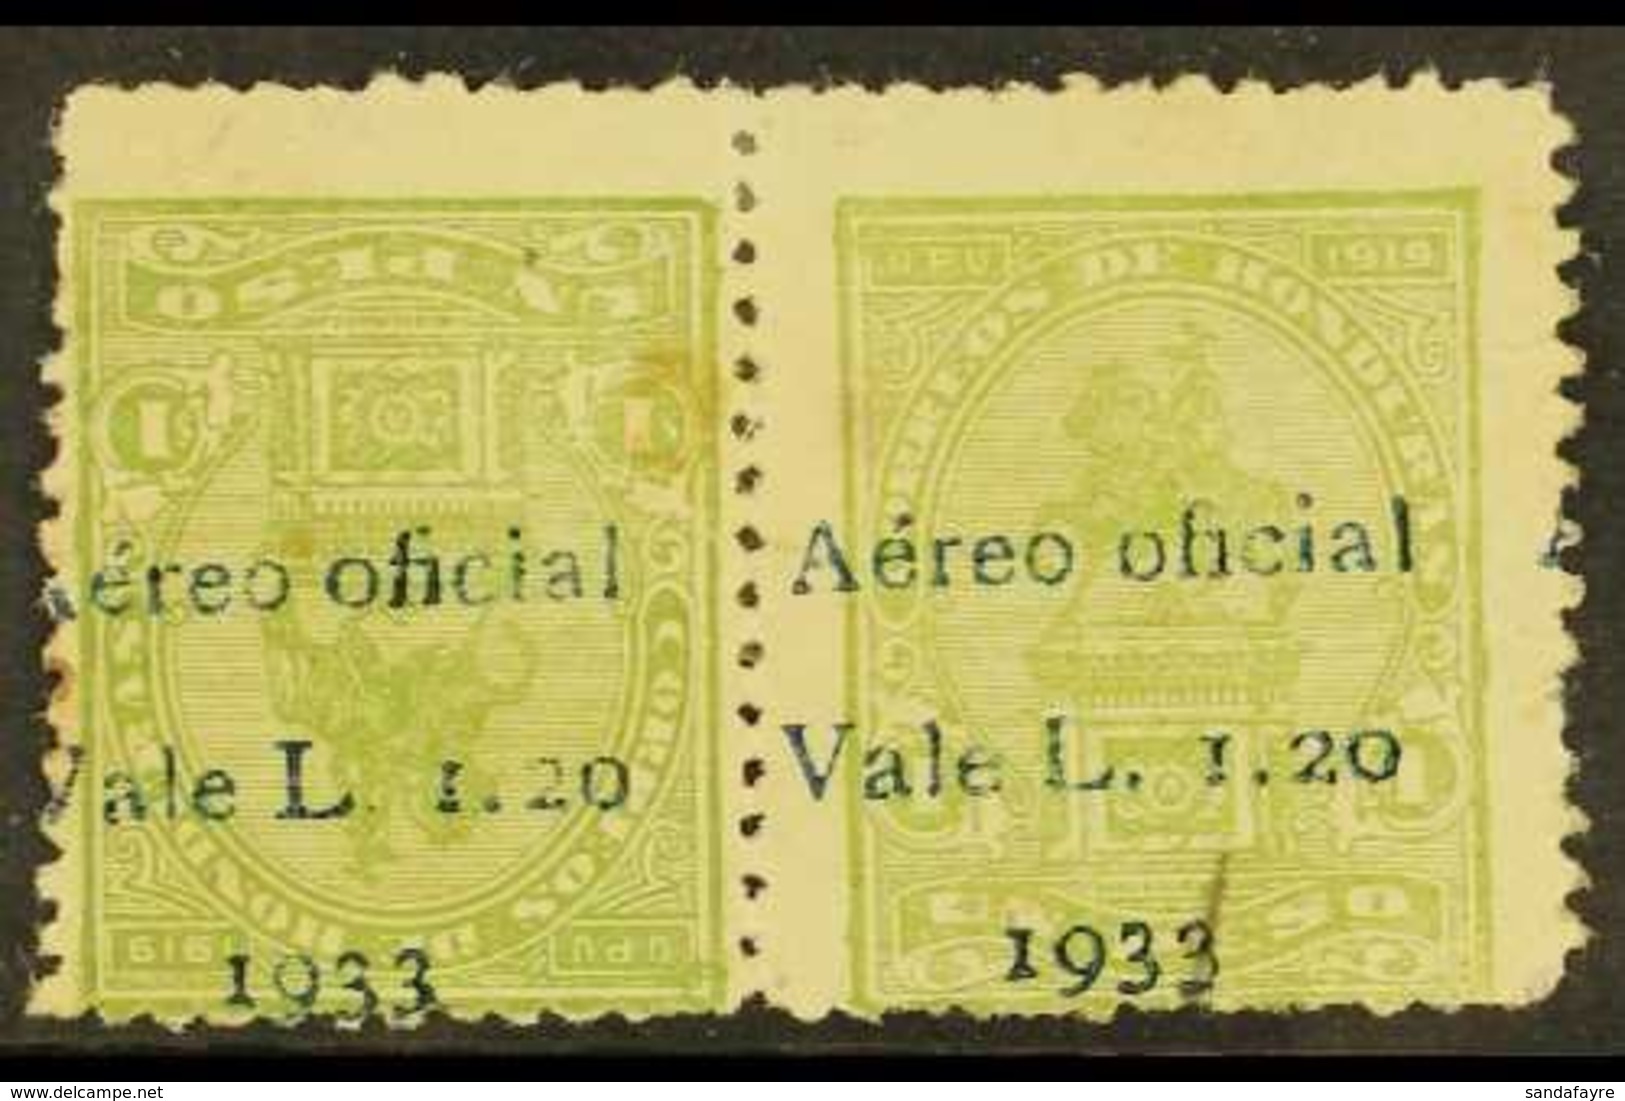 \Y 1933\Y OFFICIAL AIR 1.20L On 1p Yellow- Green (Statue) TETE-BECHE PAIR, Mint With Several Small Faults Incl Short Rep - Honduras